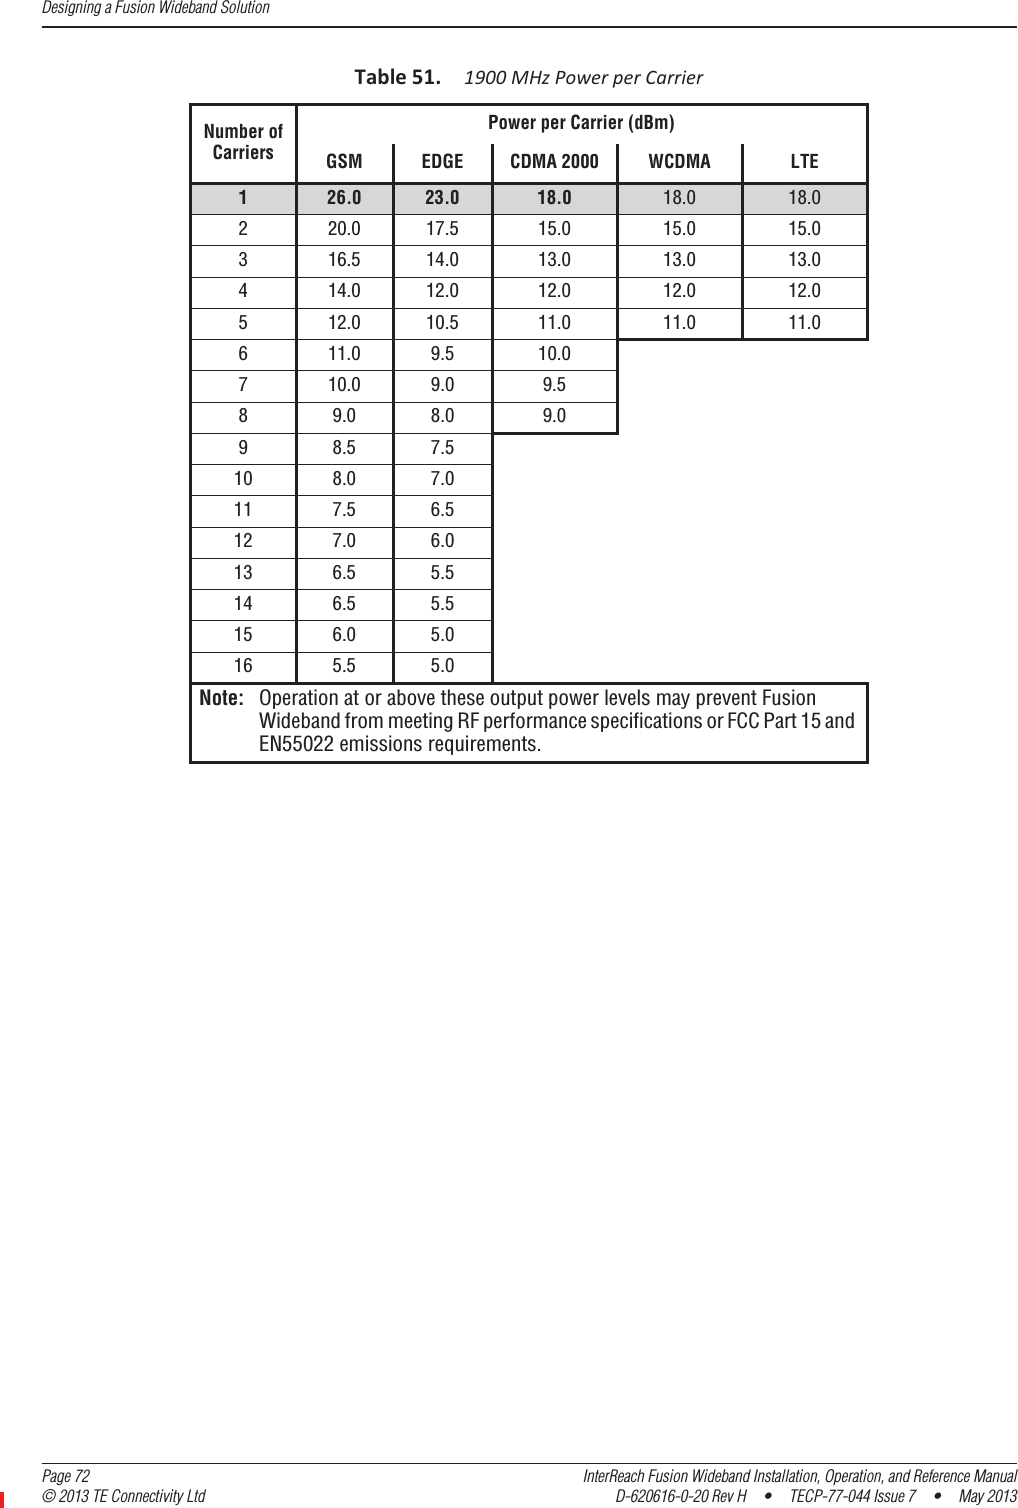 Designing a Fusion Wideband Solution  Page 72 InterReach Fusion Wideband Installation, Operation, and Reference Manual© 2013 TE Connectivity Ltd D-620616-0-20 Rev H  •  TECP-77-044 Issue 7  •  May 2013Table51.1900MHzPowerperCarrierNumber ofCarriersPower per Carrier (dBm)GSM EDGE CDMA 2000 WCDMA LTE1 26.0 23.0 18.0 18.0 18.02 20.0 17.5 15.0 15.0 15.03 16.5 14.0 13.0 13.0 13.04 14.0 12.0 12.0 12.0 12.05 12.0 10.5 11.0 11.0 11.06 11.0 9.5 10.07 10.0 9.0 9.58 9.0 8.0 9.09 8.5 7.510 8.0 7.011 7.5 6.512 7.0 6.013 6.5 5.514 6.5 5.515 6.0 5.016 5.5 5.0Note: Operation at or above these output power levels may prevent Fusion Wideband from meeting RF performance specifications or FCC Part 15 and EN55022 emissions requirements. 